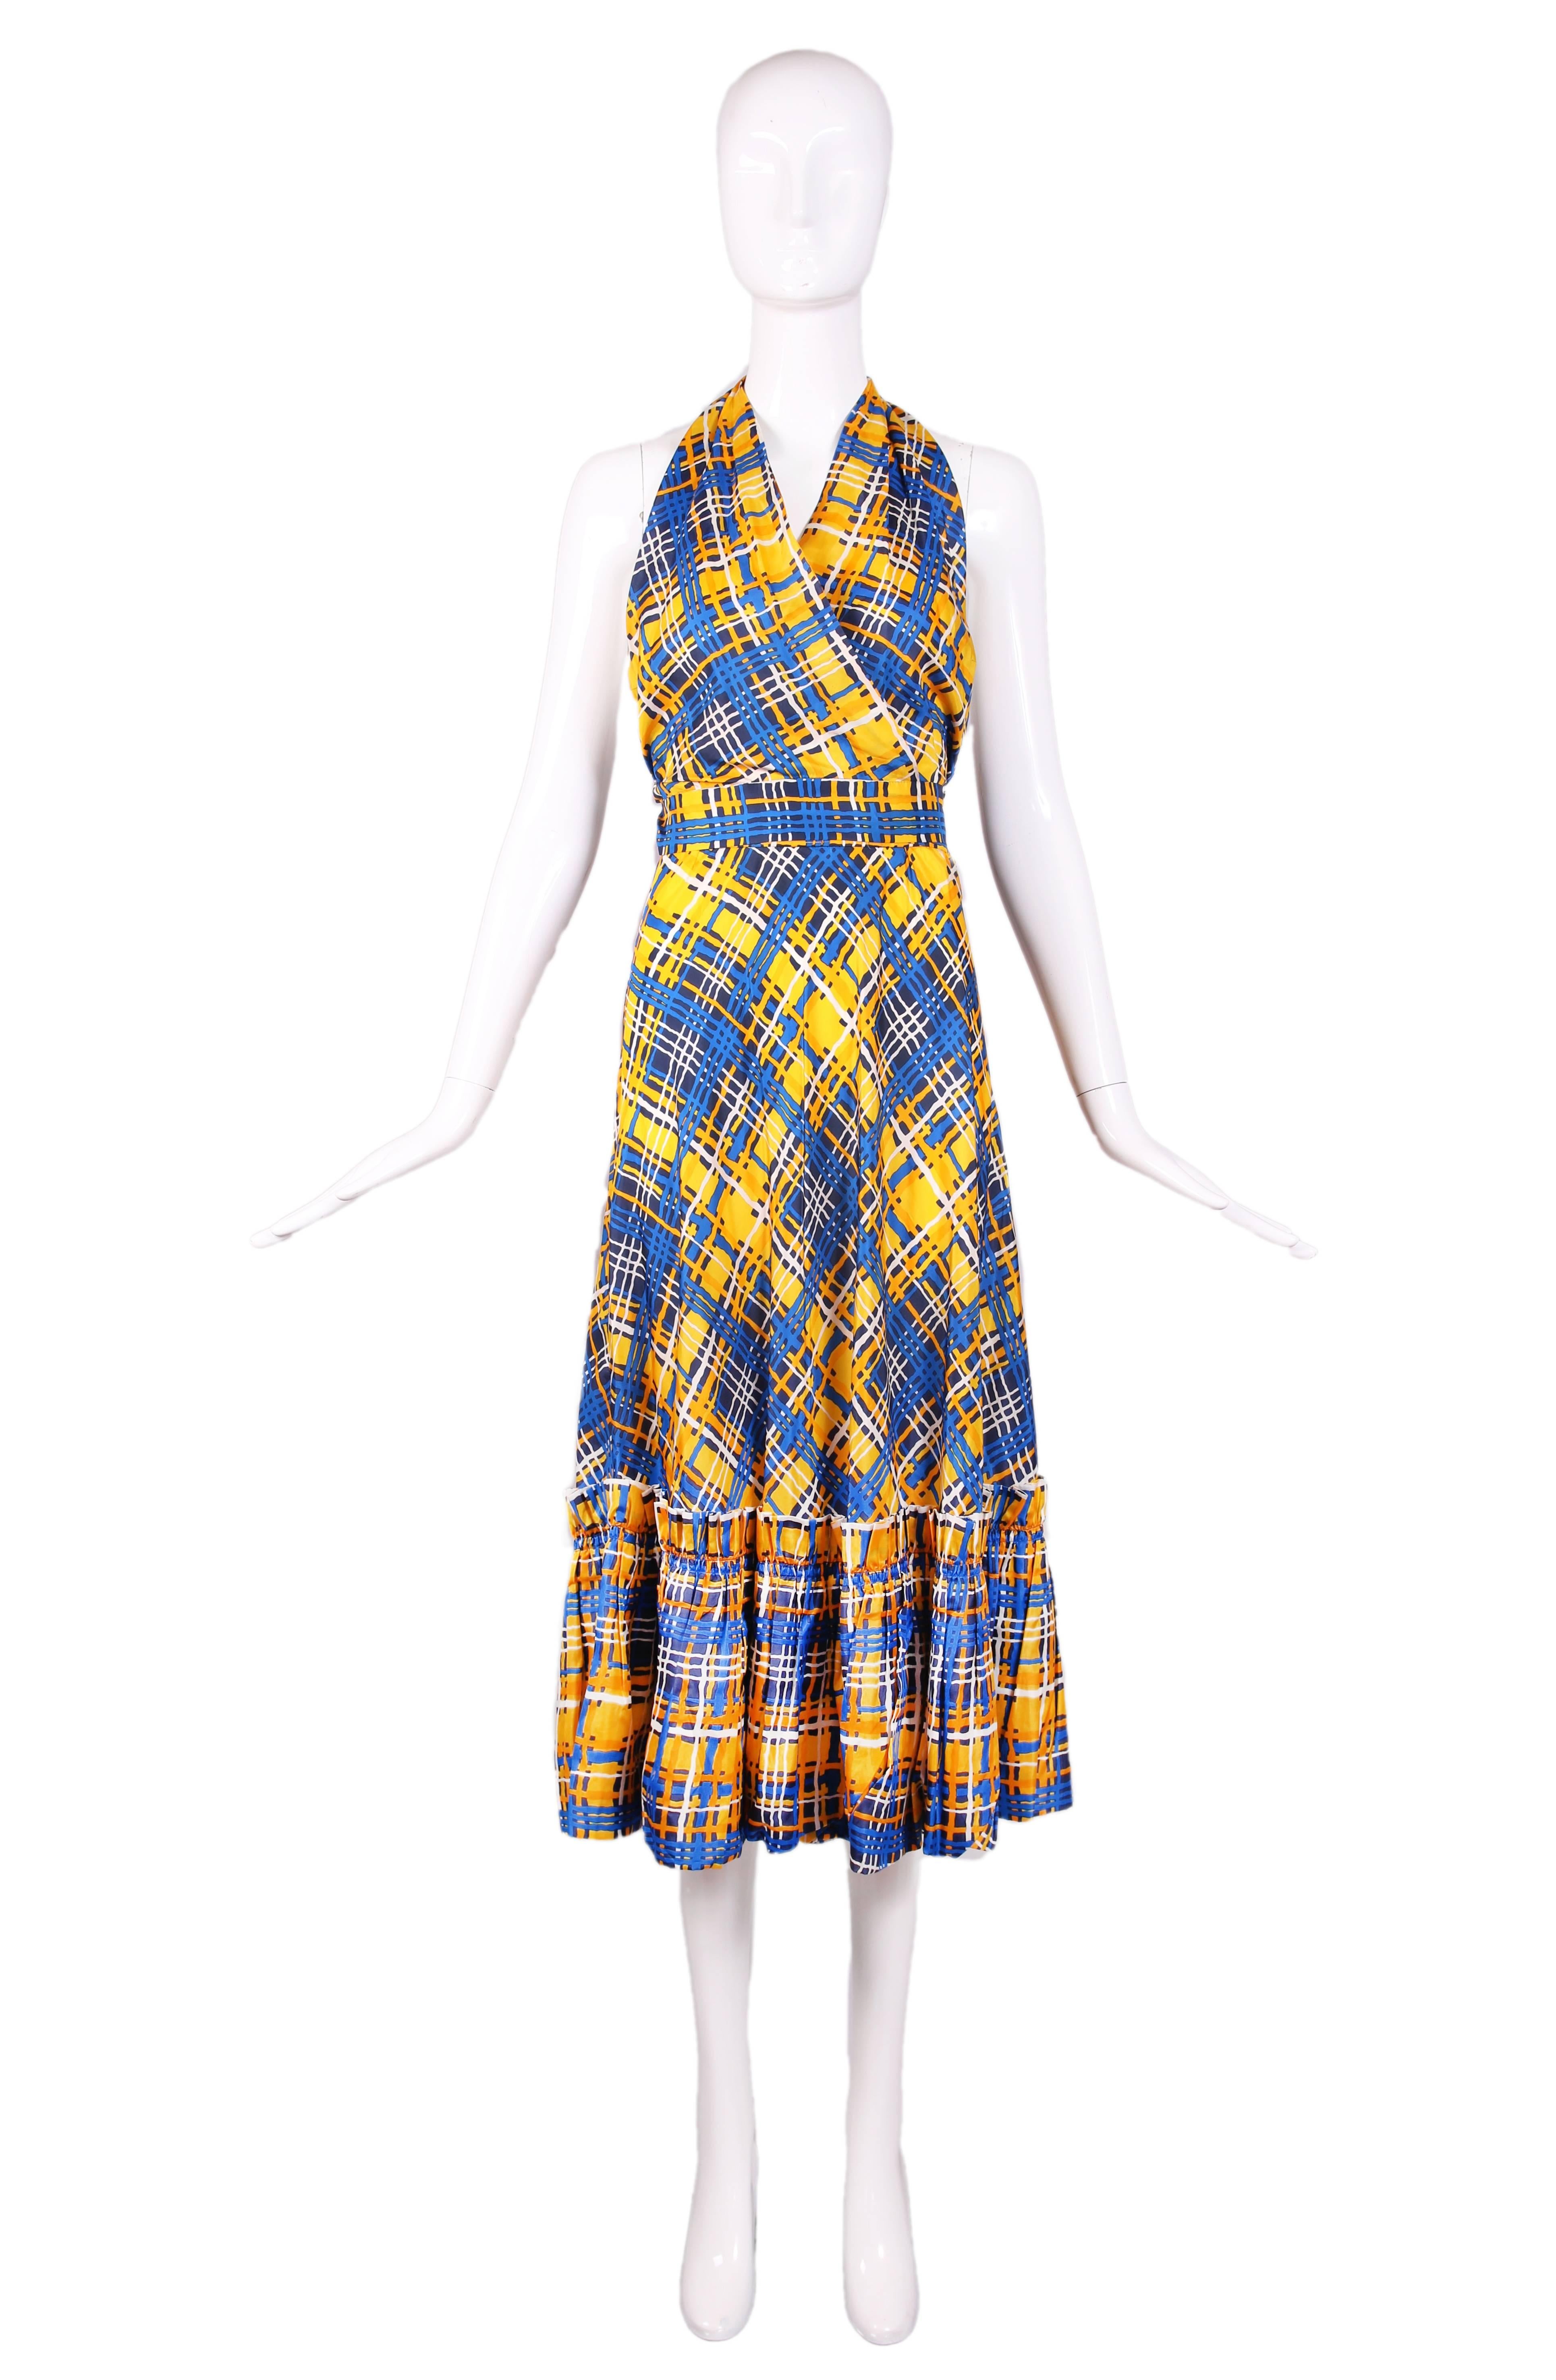 Ca. 1980 Yves Saint Laurent yellow, blue, and white plaid silk taffeta ensemble with prairie skirt and halter top. Halter has a shiny blue ring at back neck and adjustable wrap ties around the waist. In excellent condition - both skirt & top appear